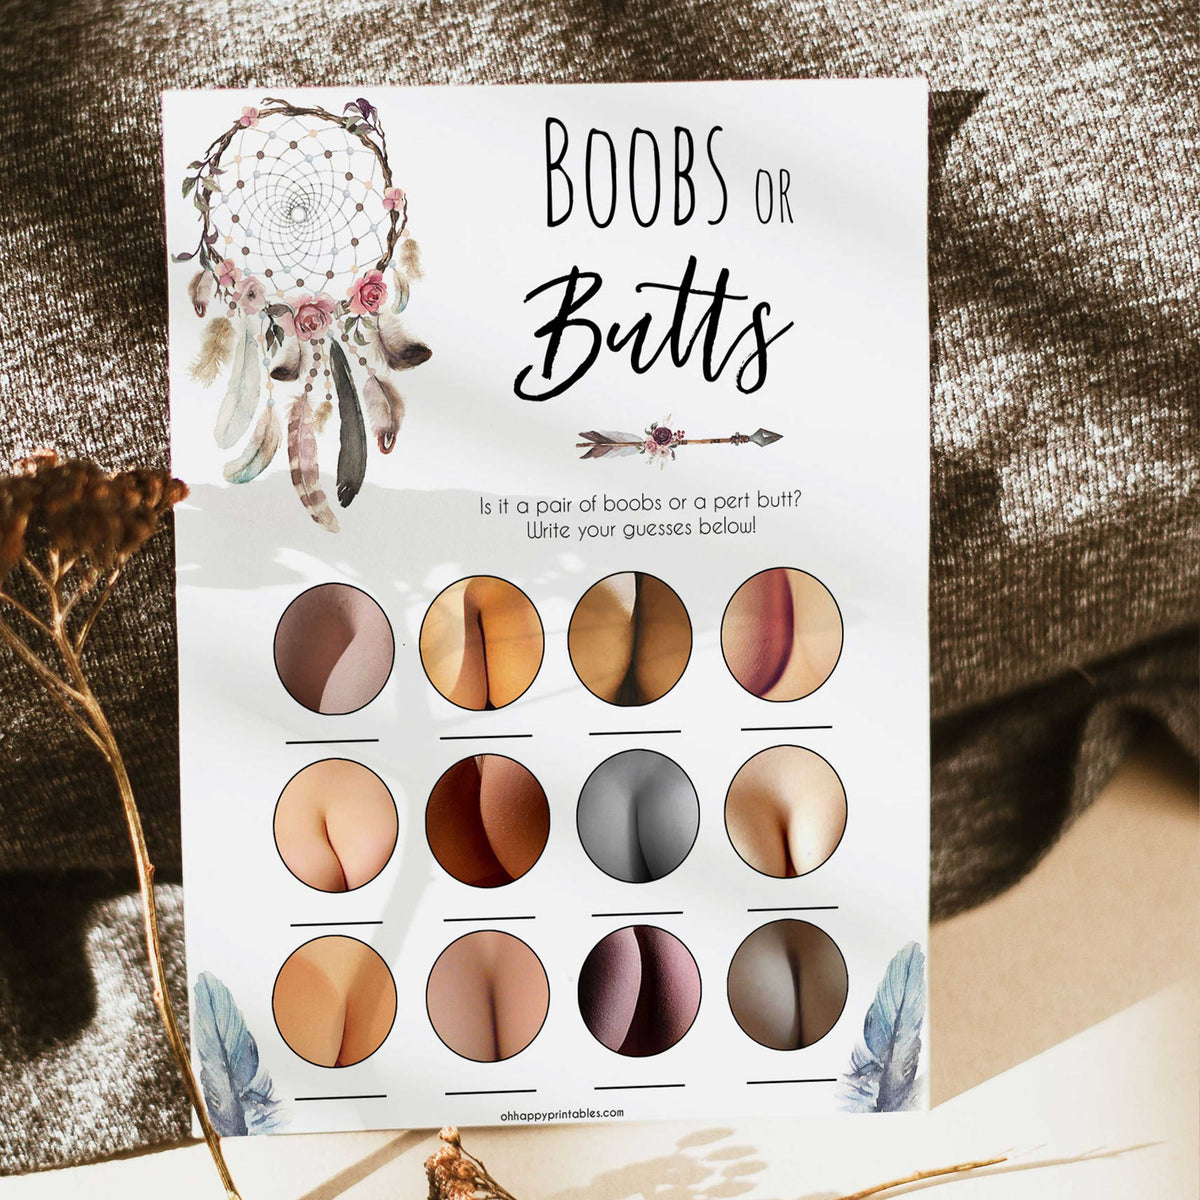 Boho baby games, boobs or butts baby game, fun baby games, printable baby games, top 10 baby games, boho baby shower, baby games, hilarious baby games